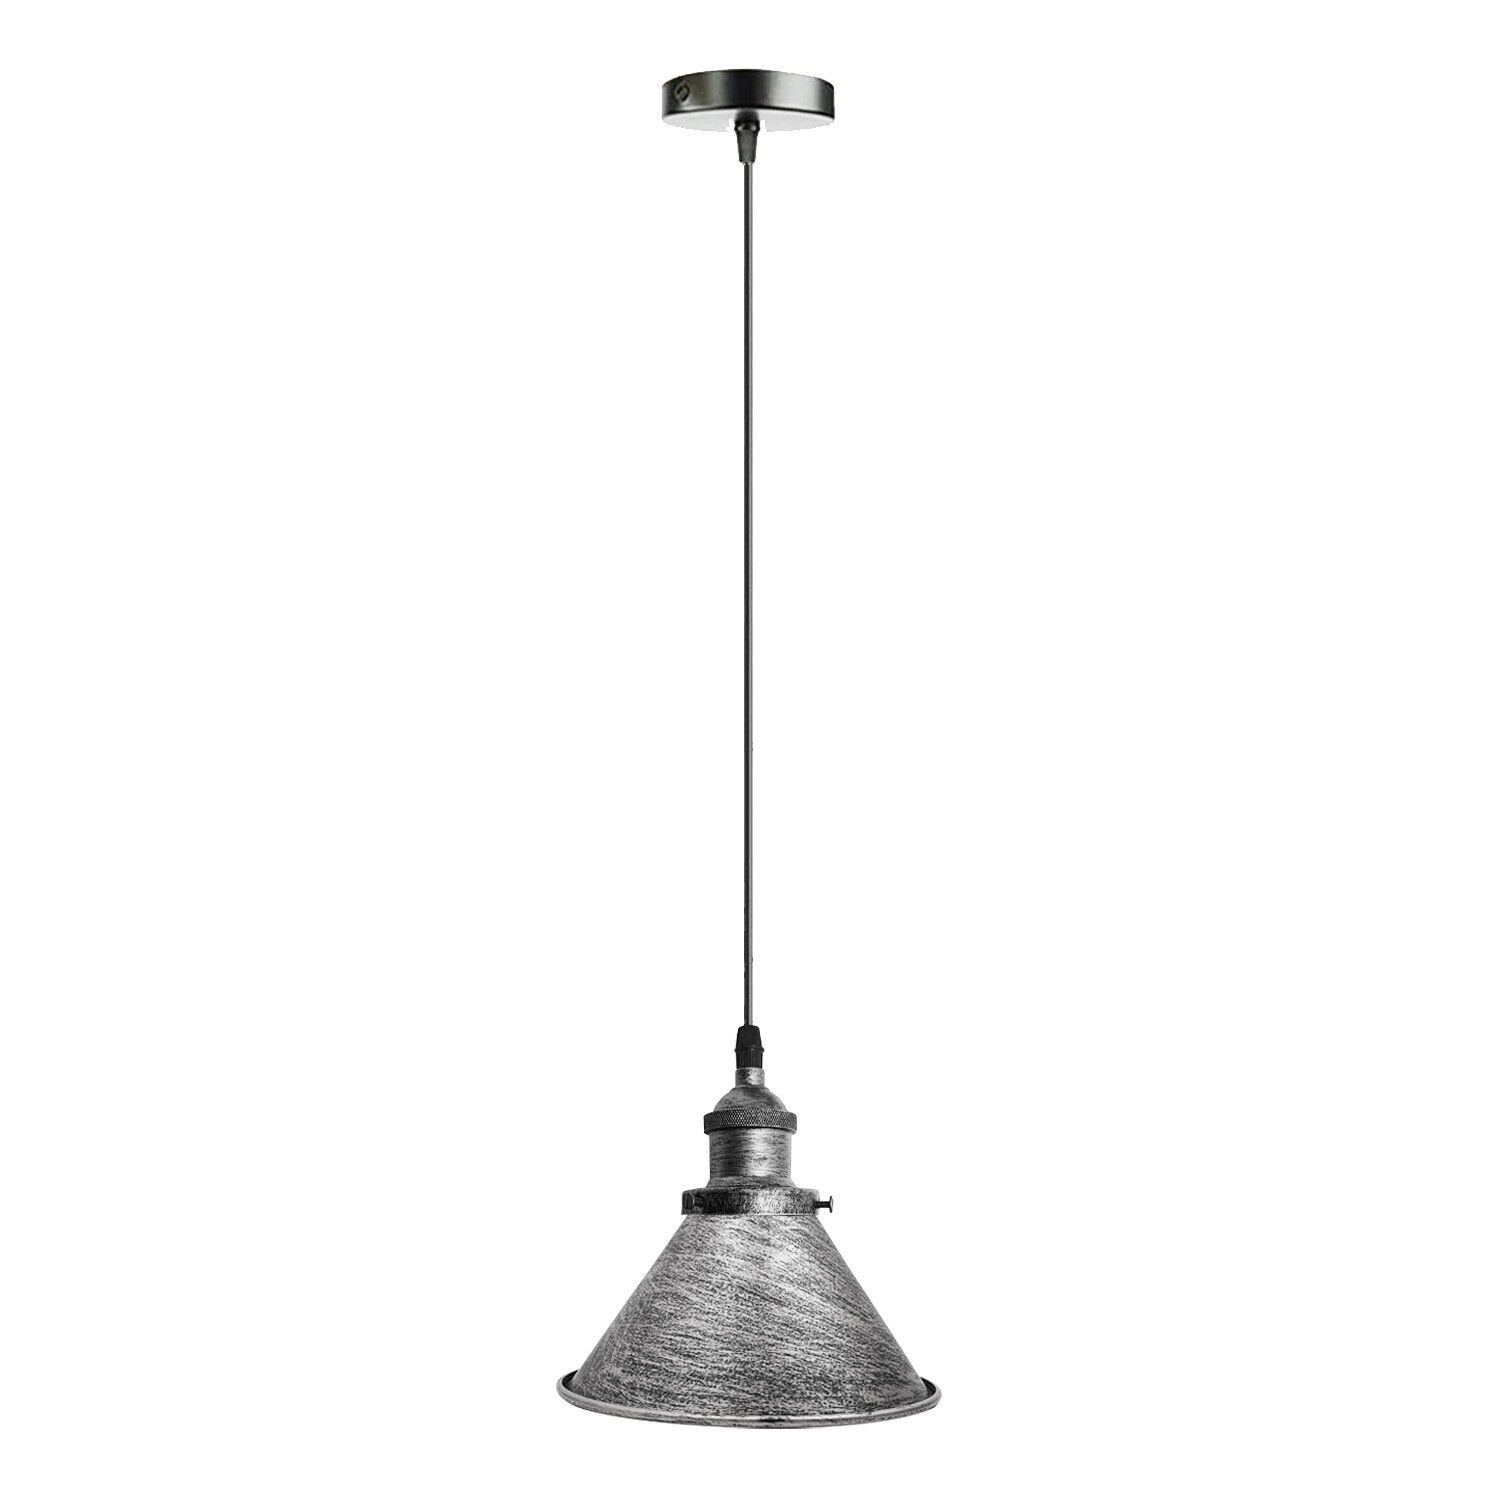 Adjustable cable ceiling pendant light with cone Lampshade